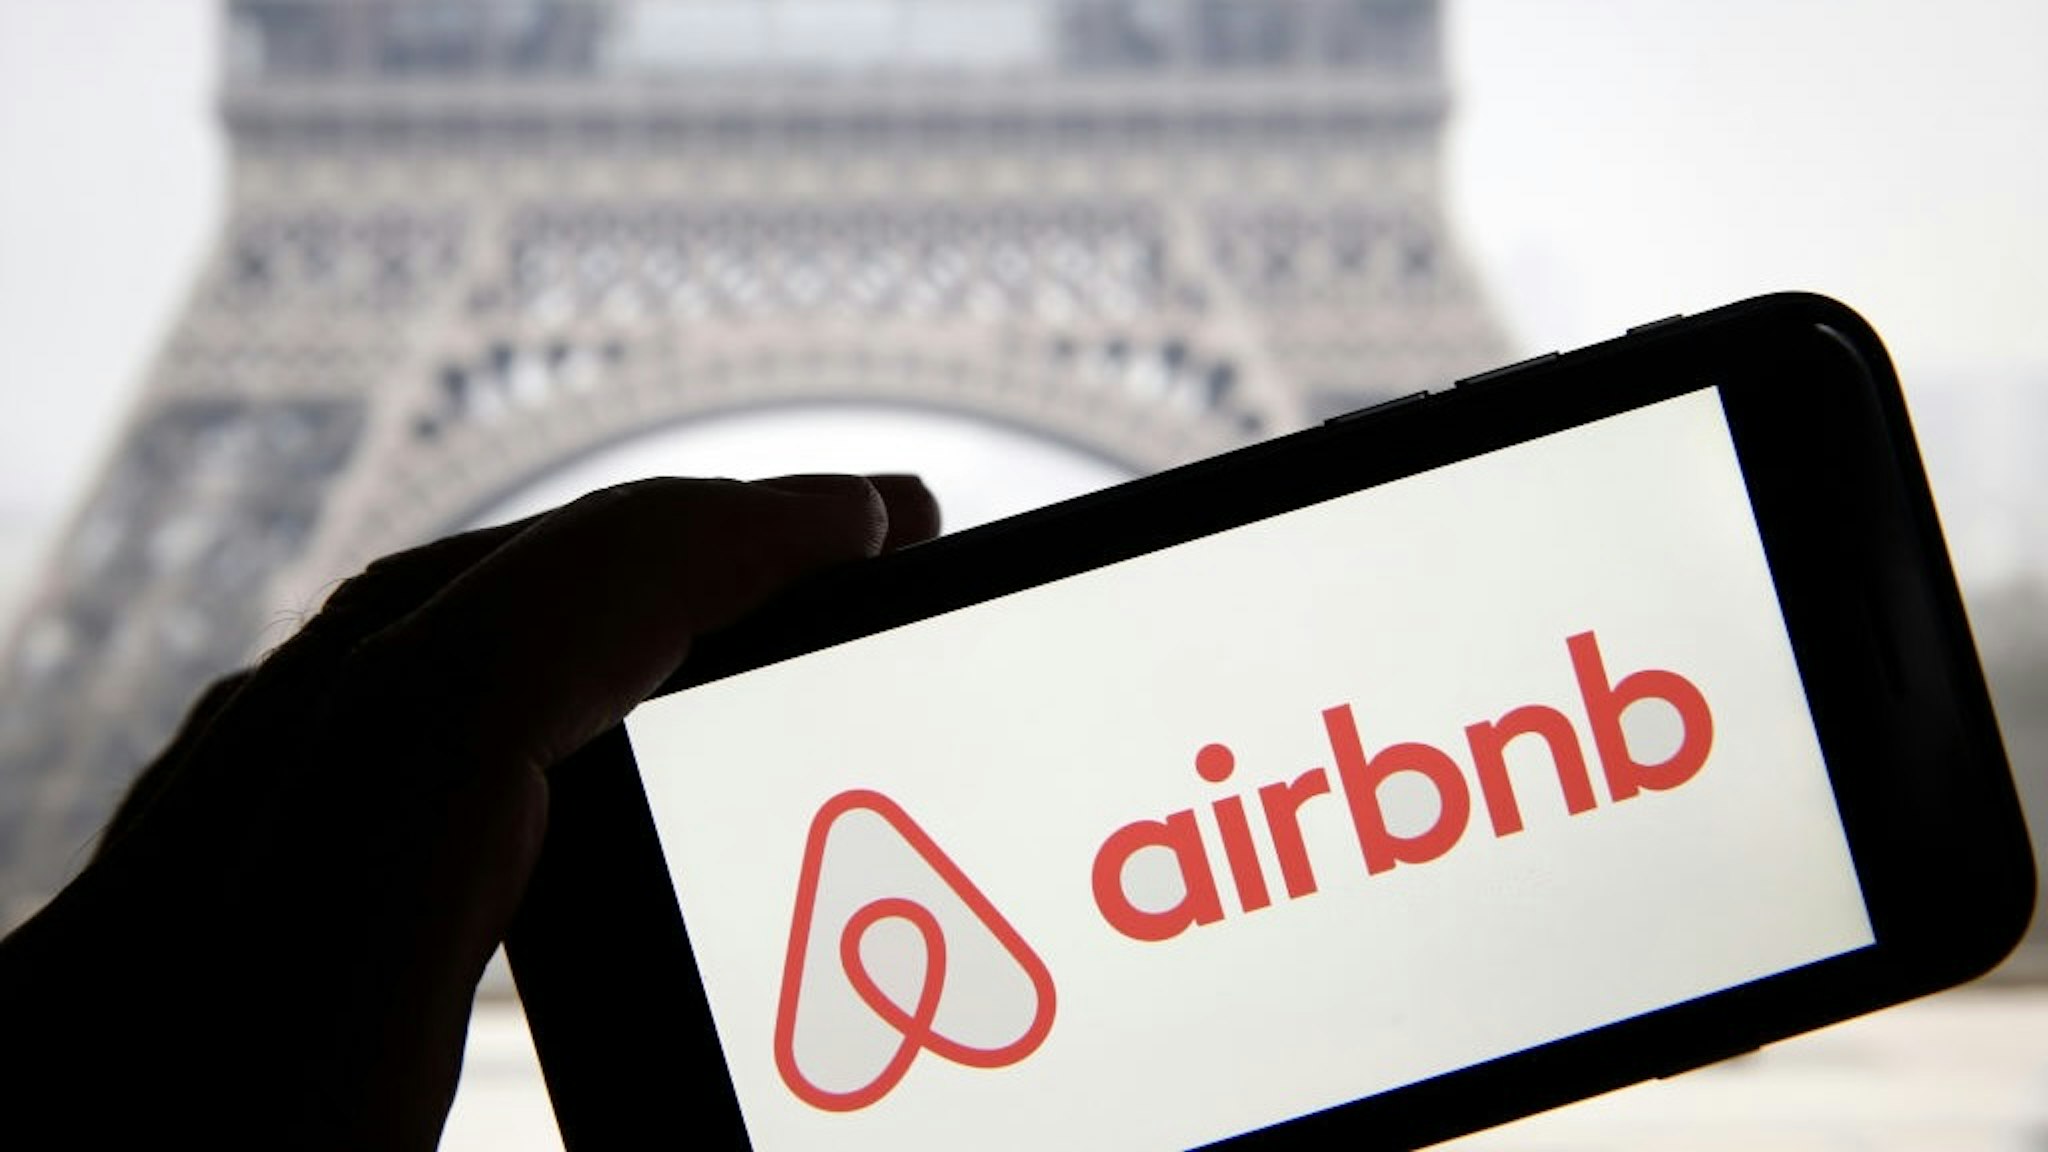 Airbnb : Illustration PARIS, FRANCE - FEBRUARY 11: In this photo illustration, the Airbnb logo is displayed on the screen of an iPhone in front of a computer screen displaying a picture of the Eiffel Tower on February 11, 2019 in Paris, France. Paris is one of the most popular destinations for Airbnb, but city authorities do not agree with the private rental and booking company. The mayor of Paris, Anne Hidalgo, announced Sunday that the city would sue Airbnb for 14 million dollars, because of the alleged list of 1,000 illegal rentals. (Photo by Chesnot/Getty Images) Chesnot / Contributor via Getty Images